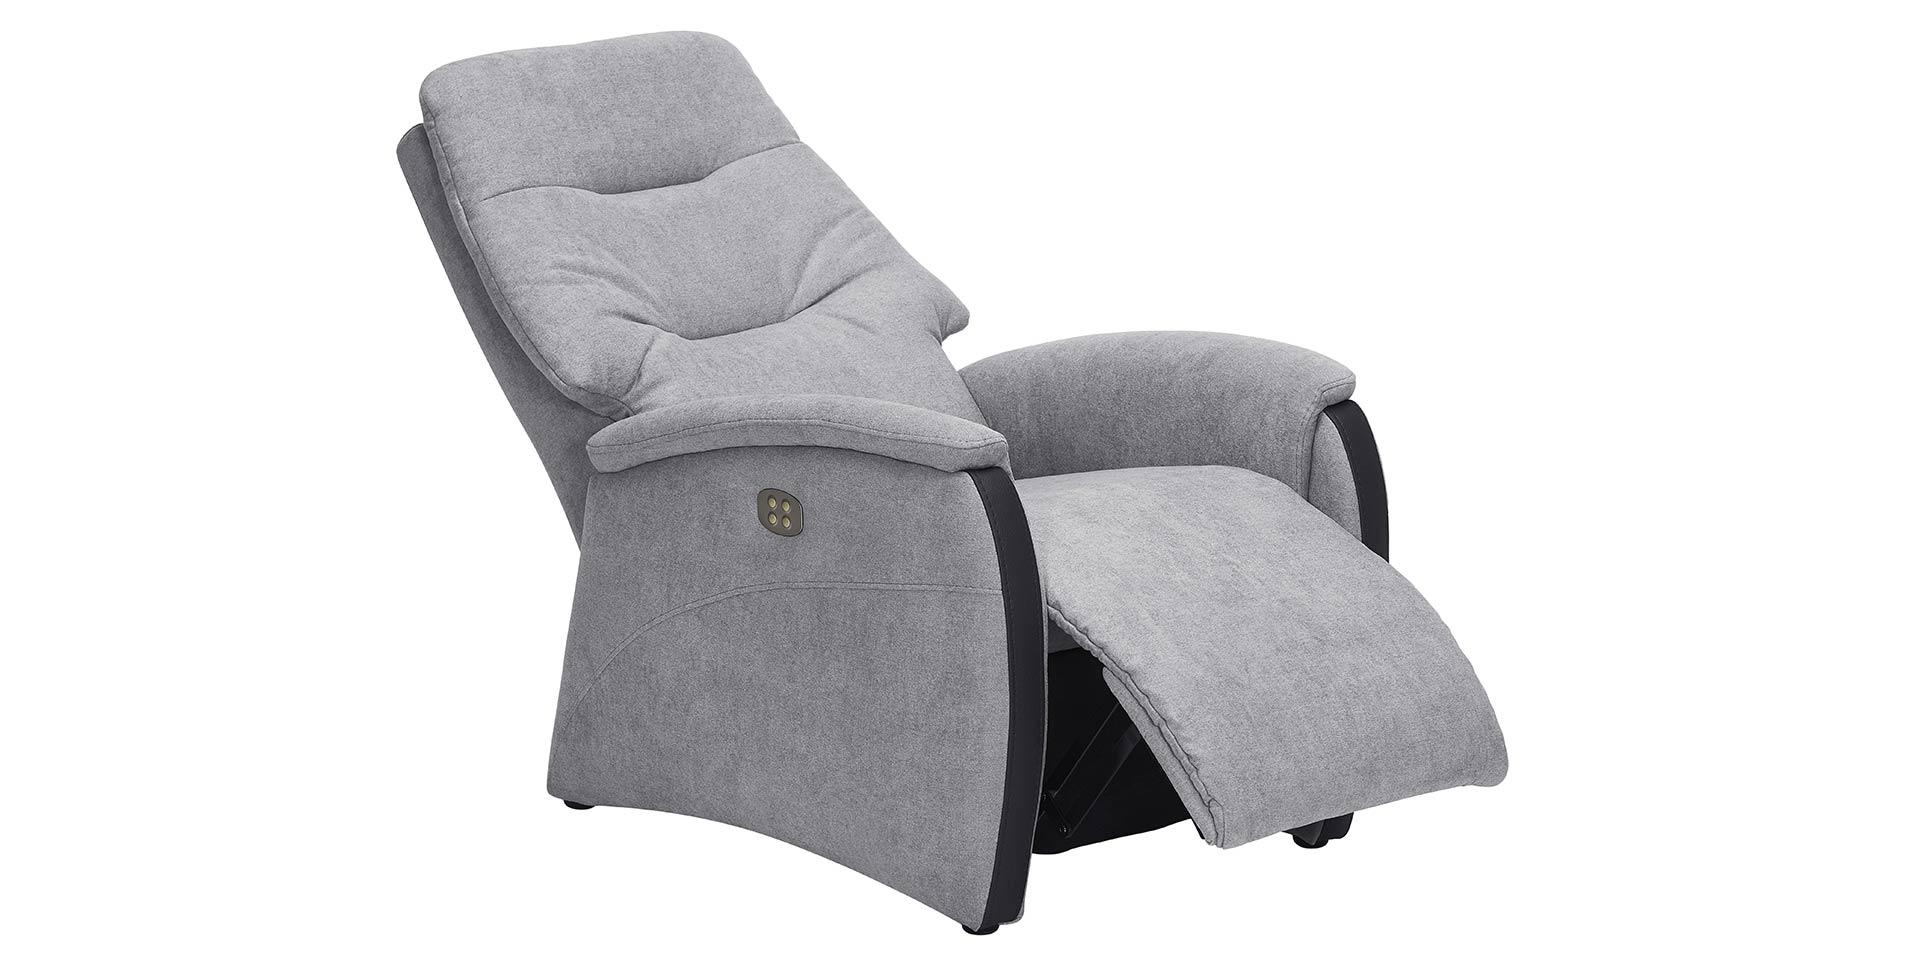 Slider Fauteuil relaxation ALDO (image 2)